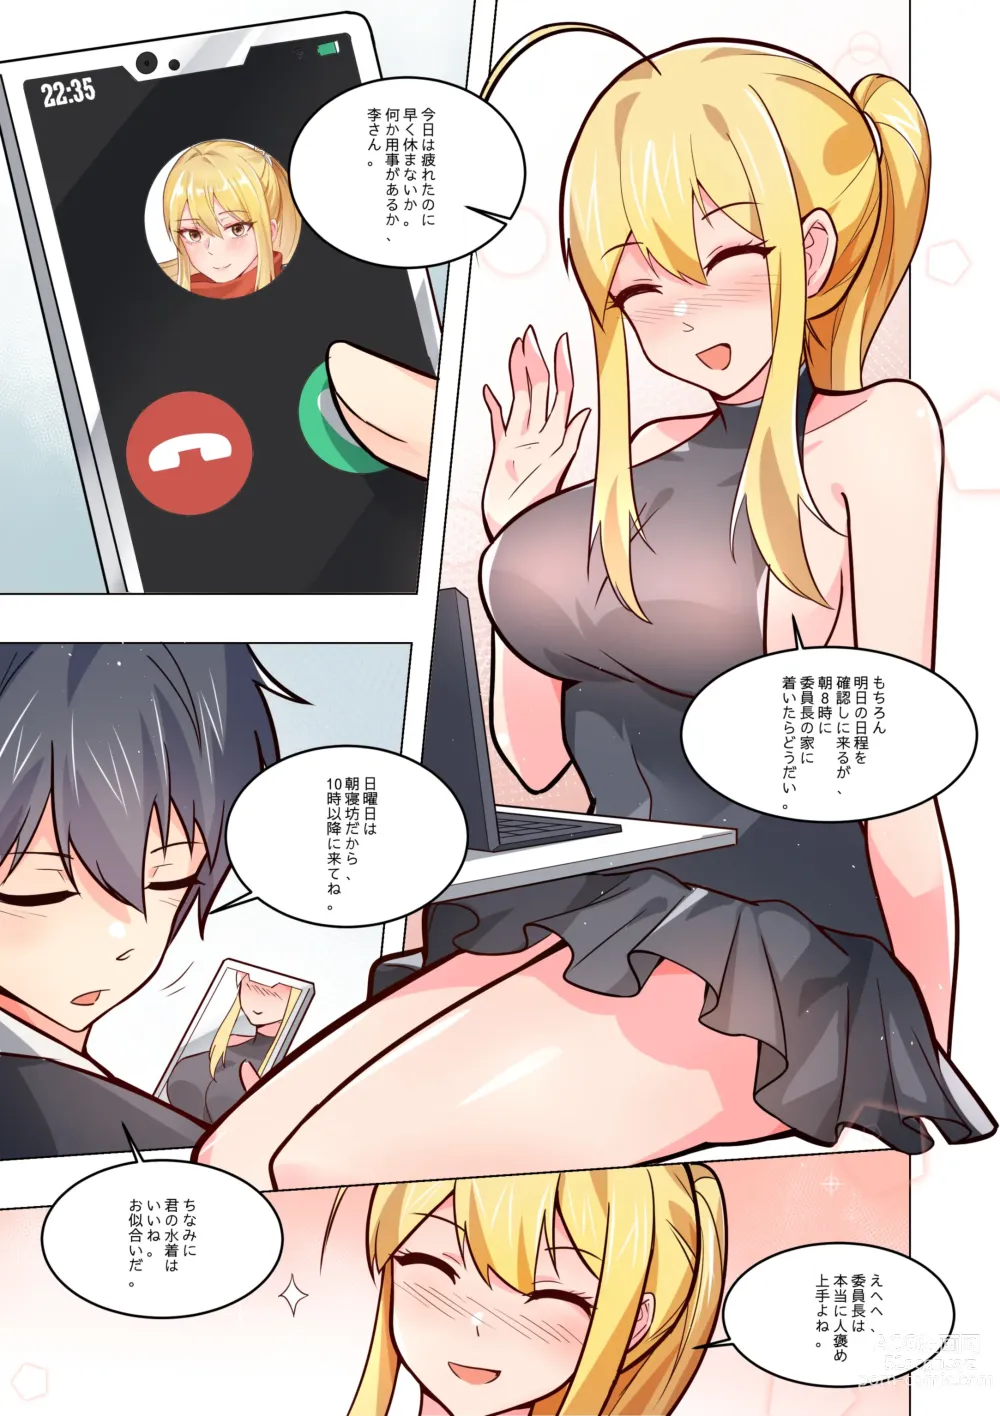 Page 57 of doujinshi ノーパン彼女